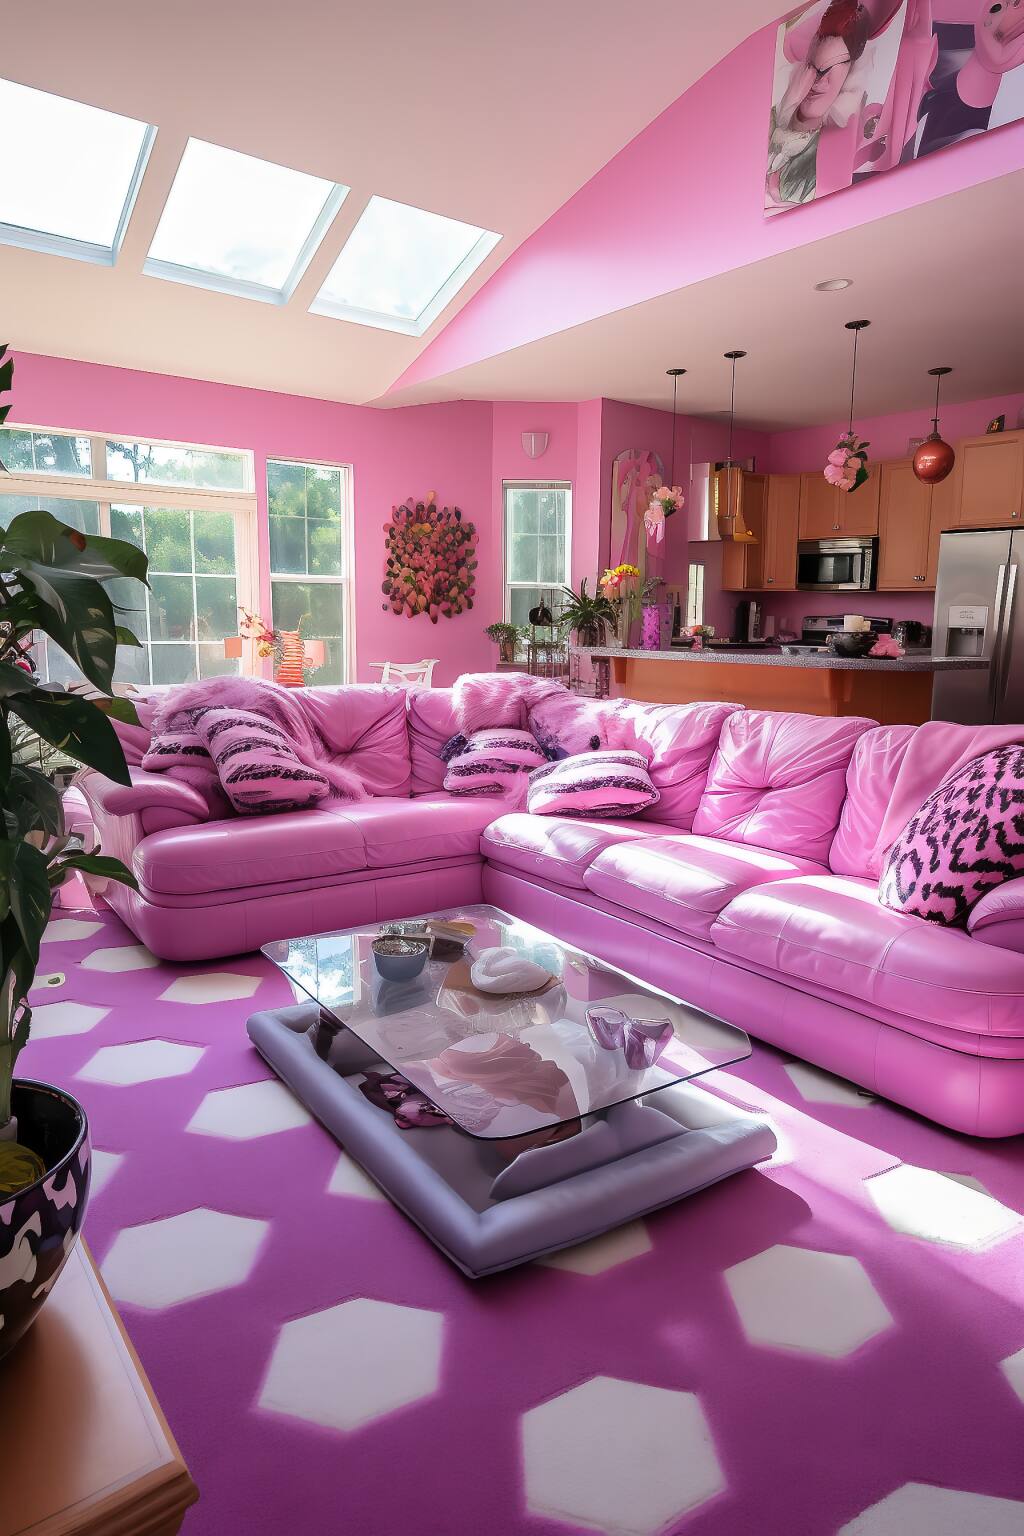 An Eclectic Romantic Living Room With A Pink Leather Sofa, Geometric Pink And White Carpet, And Vibrant Decor Elements, Under Natural Skylight Illumination.